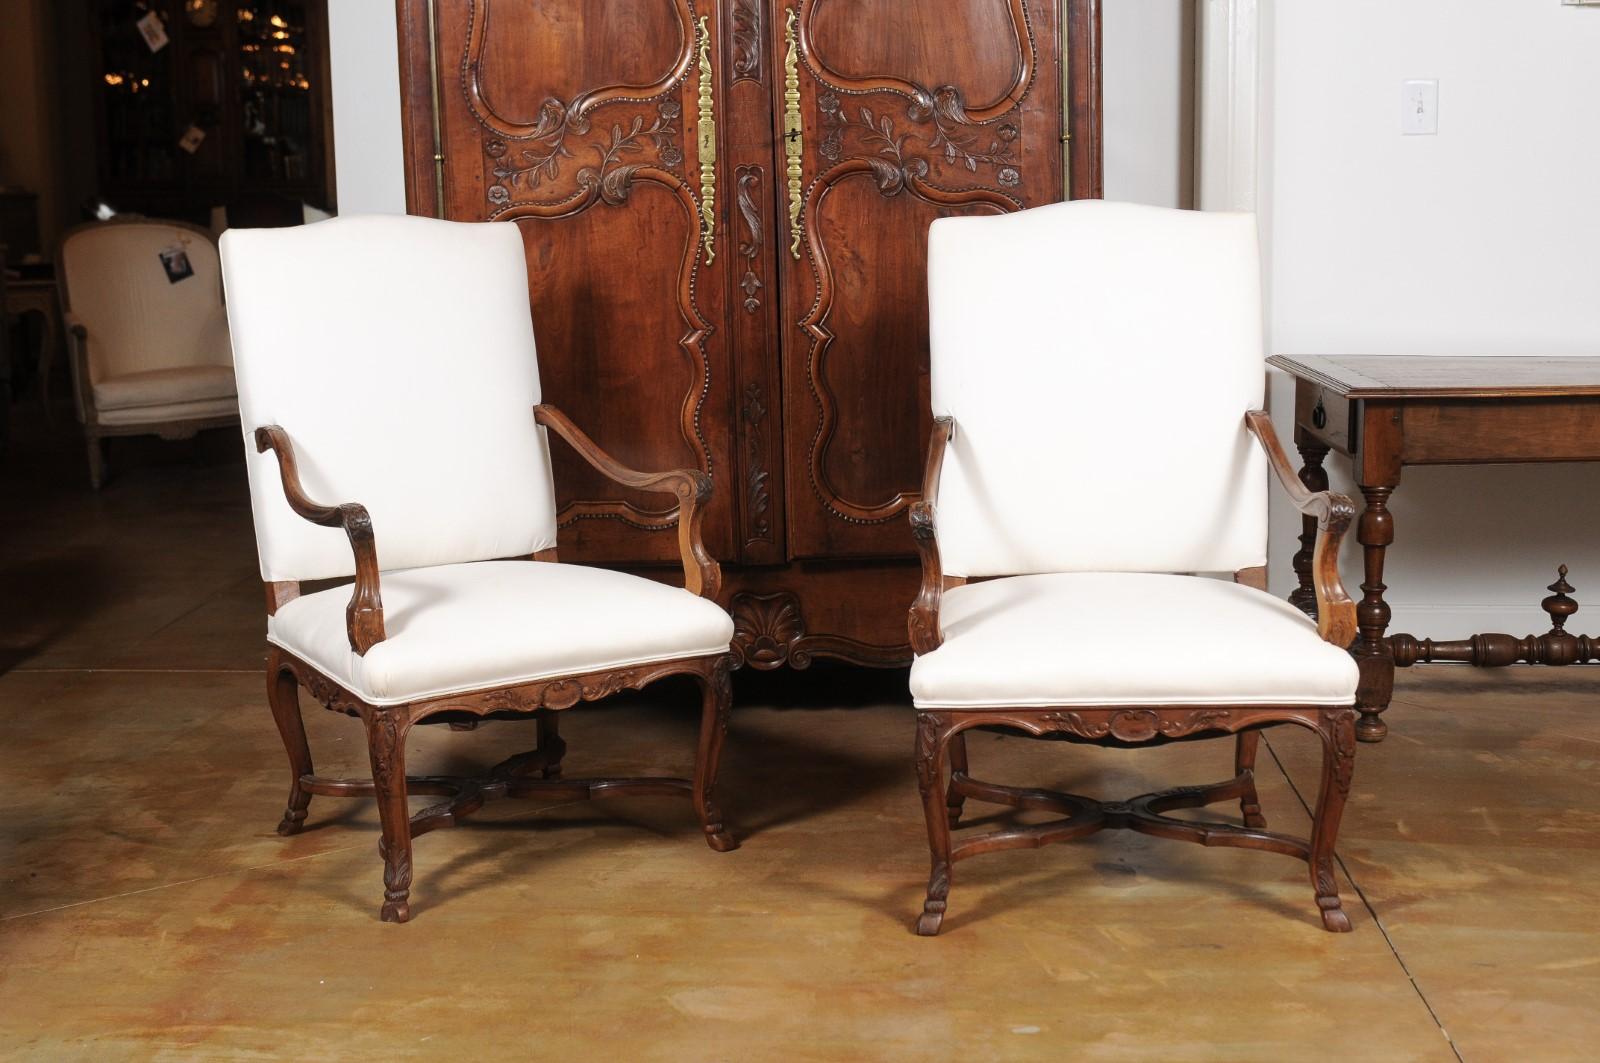 A pair of French Régence style walnut armchairs from the 19th century, with carved foliage, hoofed feet, cross stretcher and new upholstery. Created in France during the 19th century, each of this pair of fauteuils features a slightly slanted back